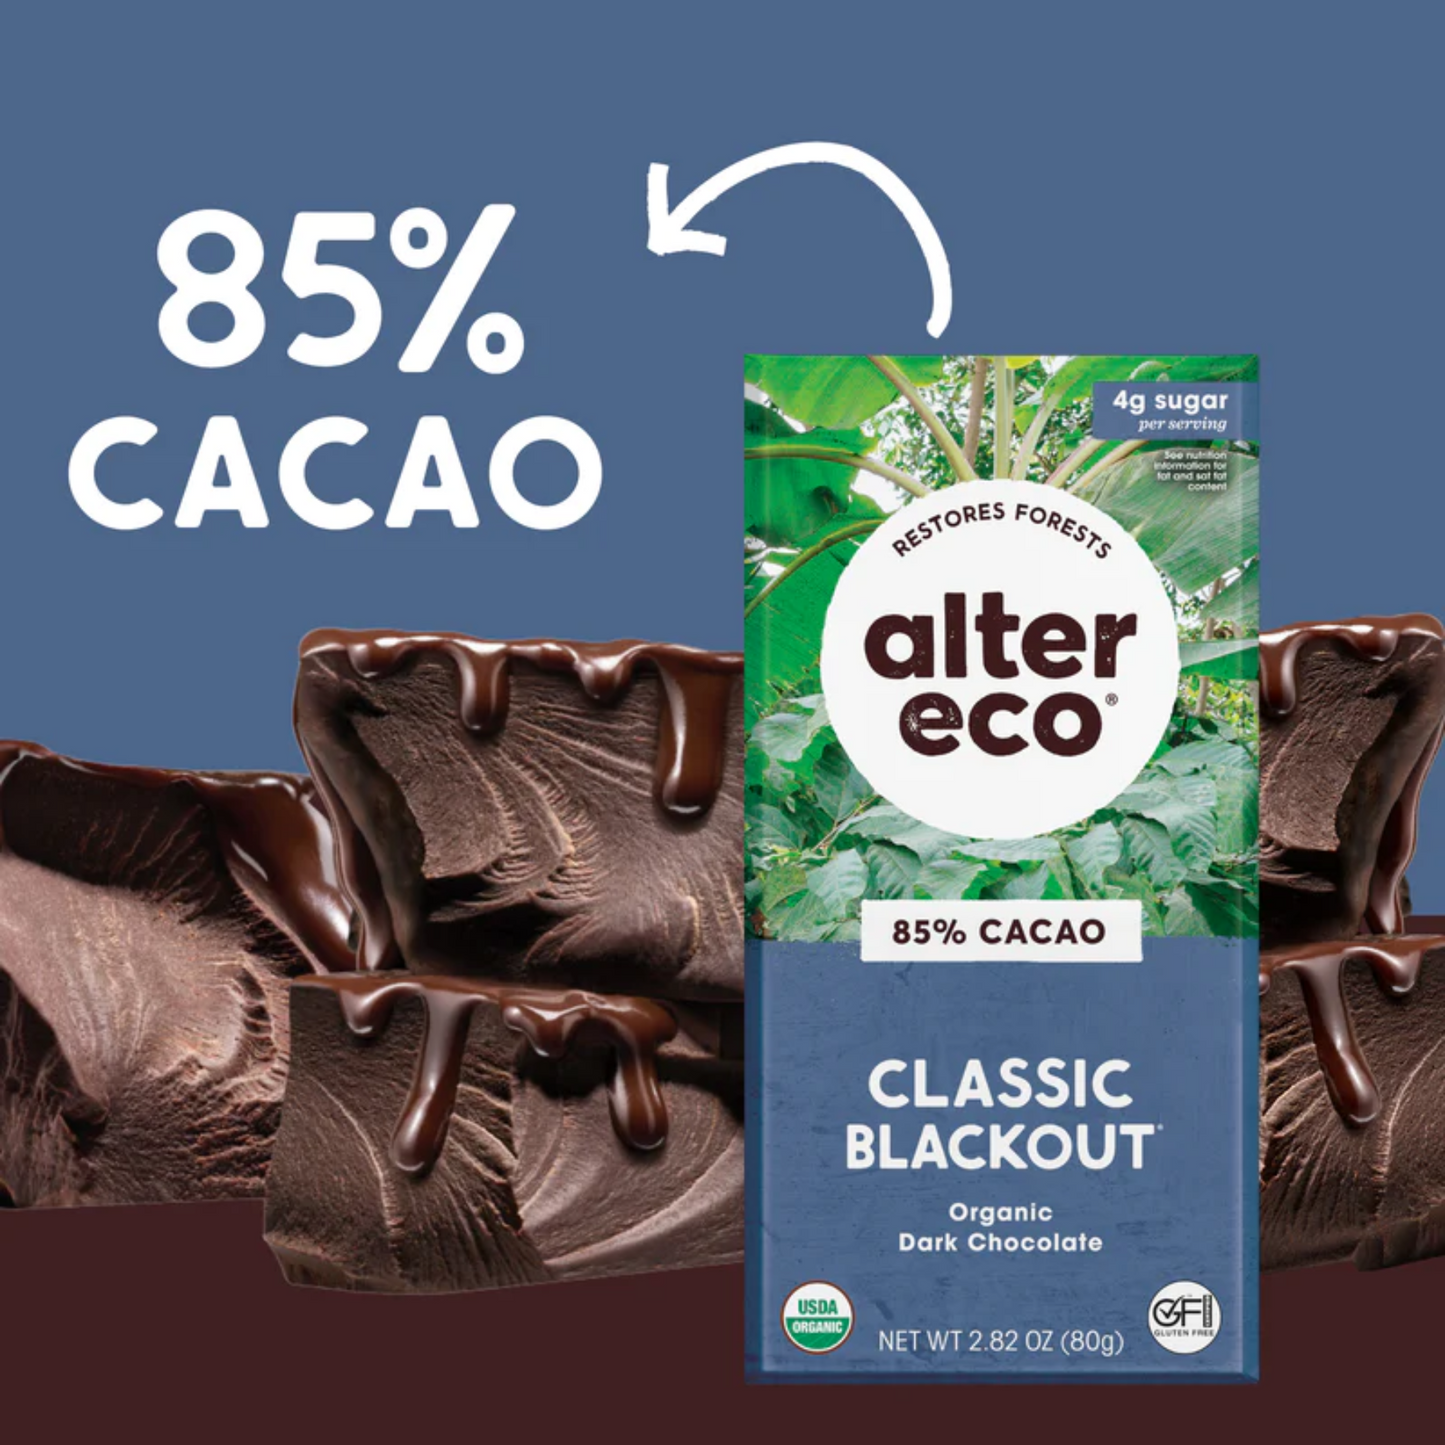 Alter Eco Chocolate 80g, Classic Blackout Flavour 85% Cacao, Certified Organic